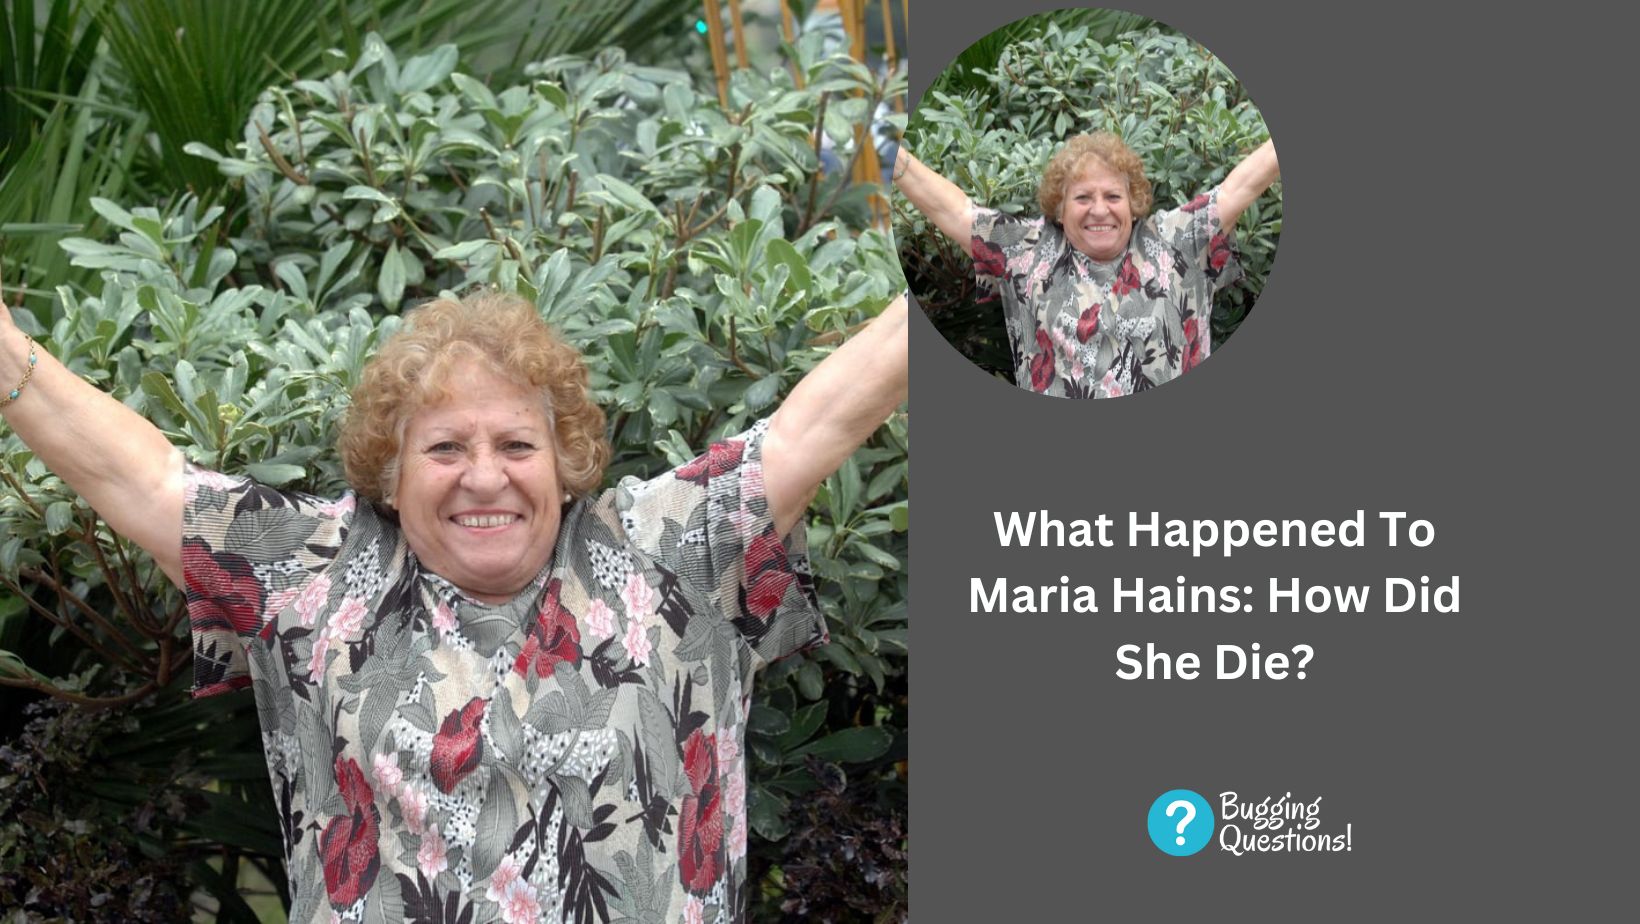 What Happened To Maria Hains: How Did She Die?